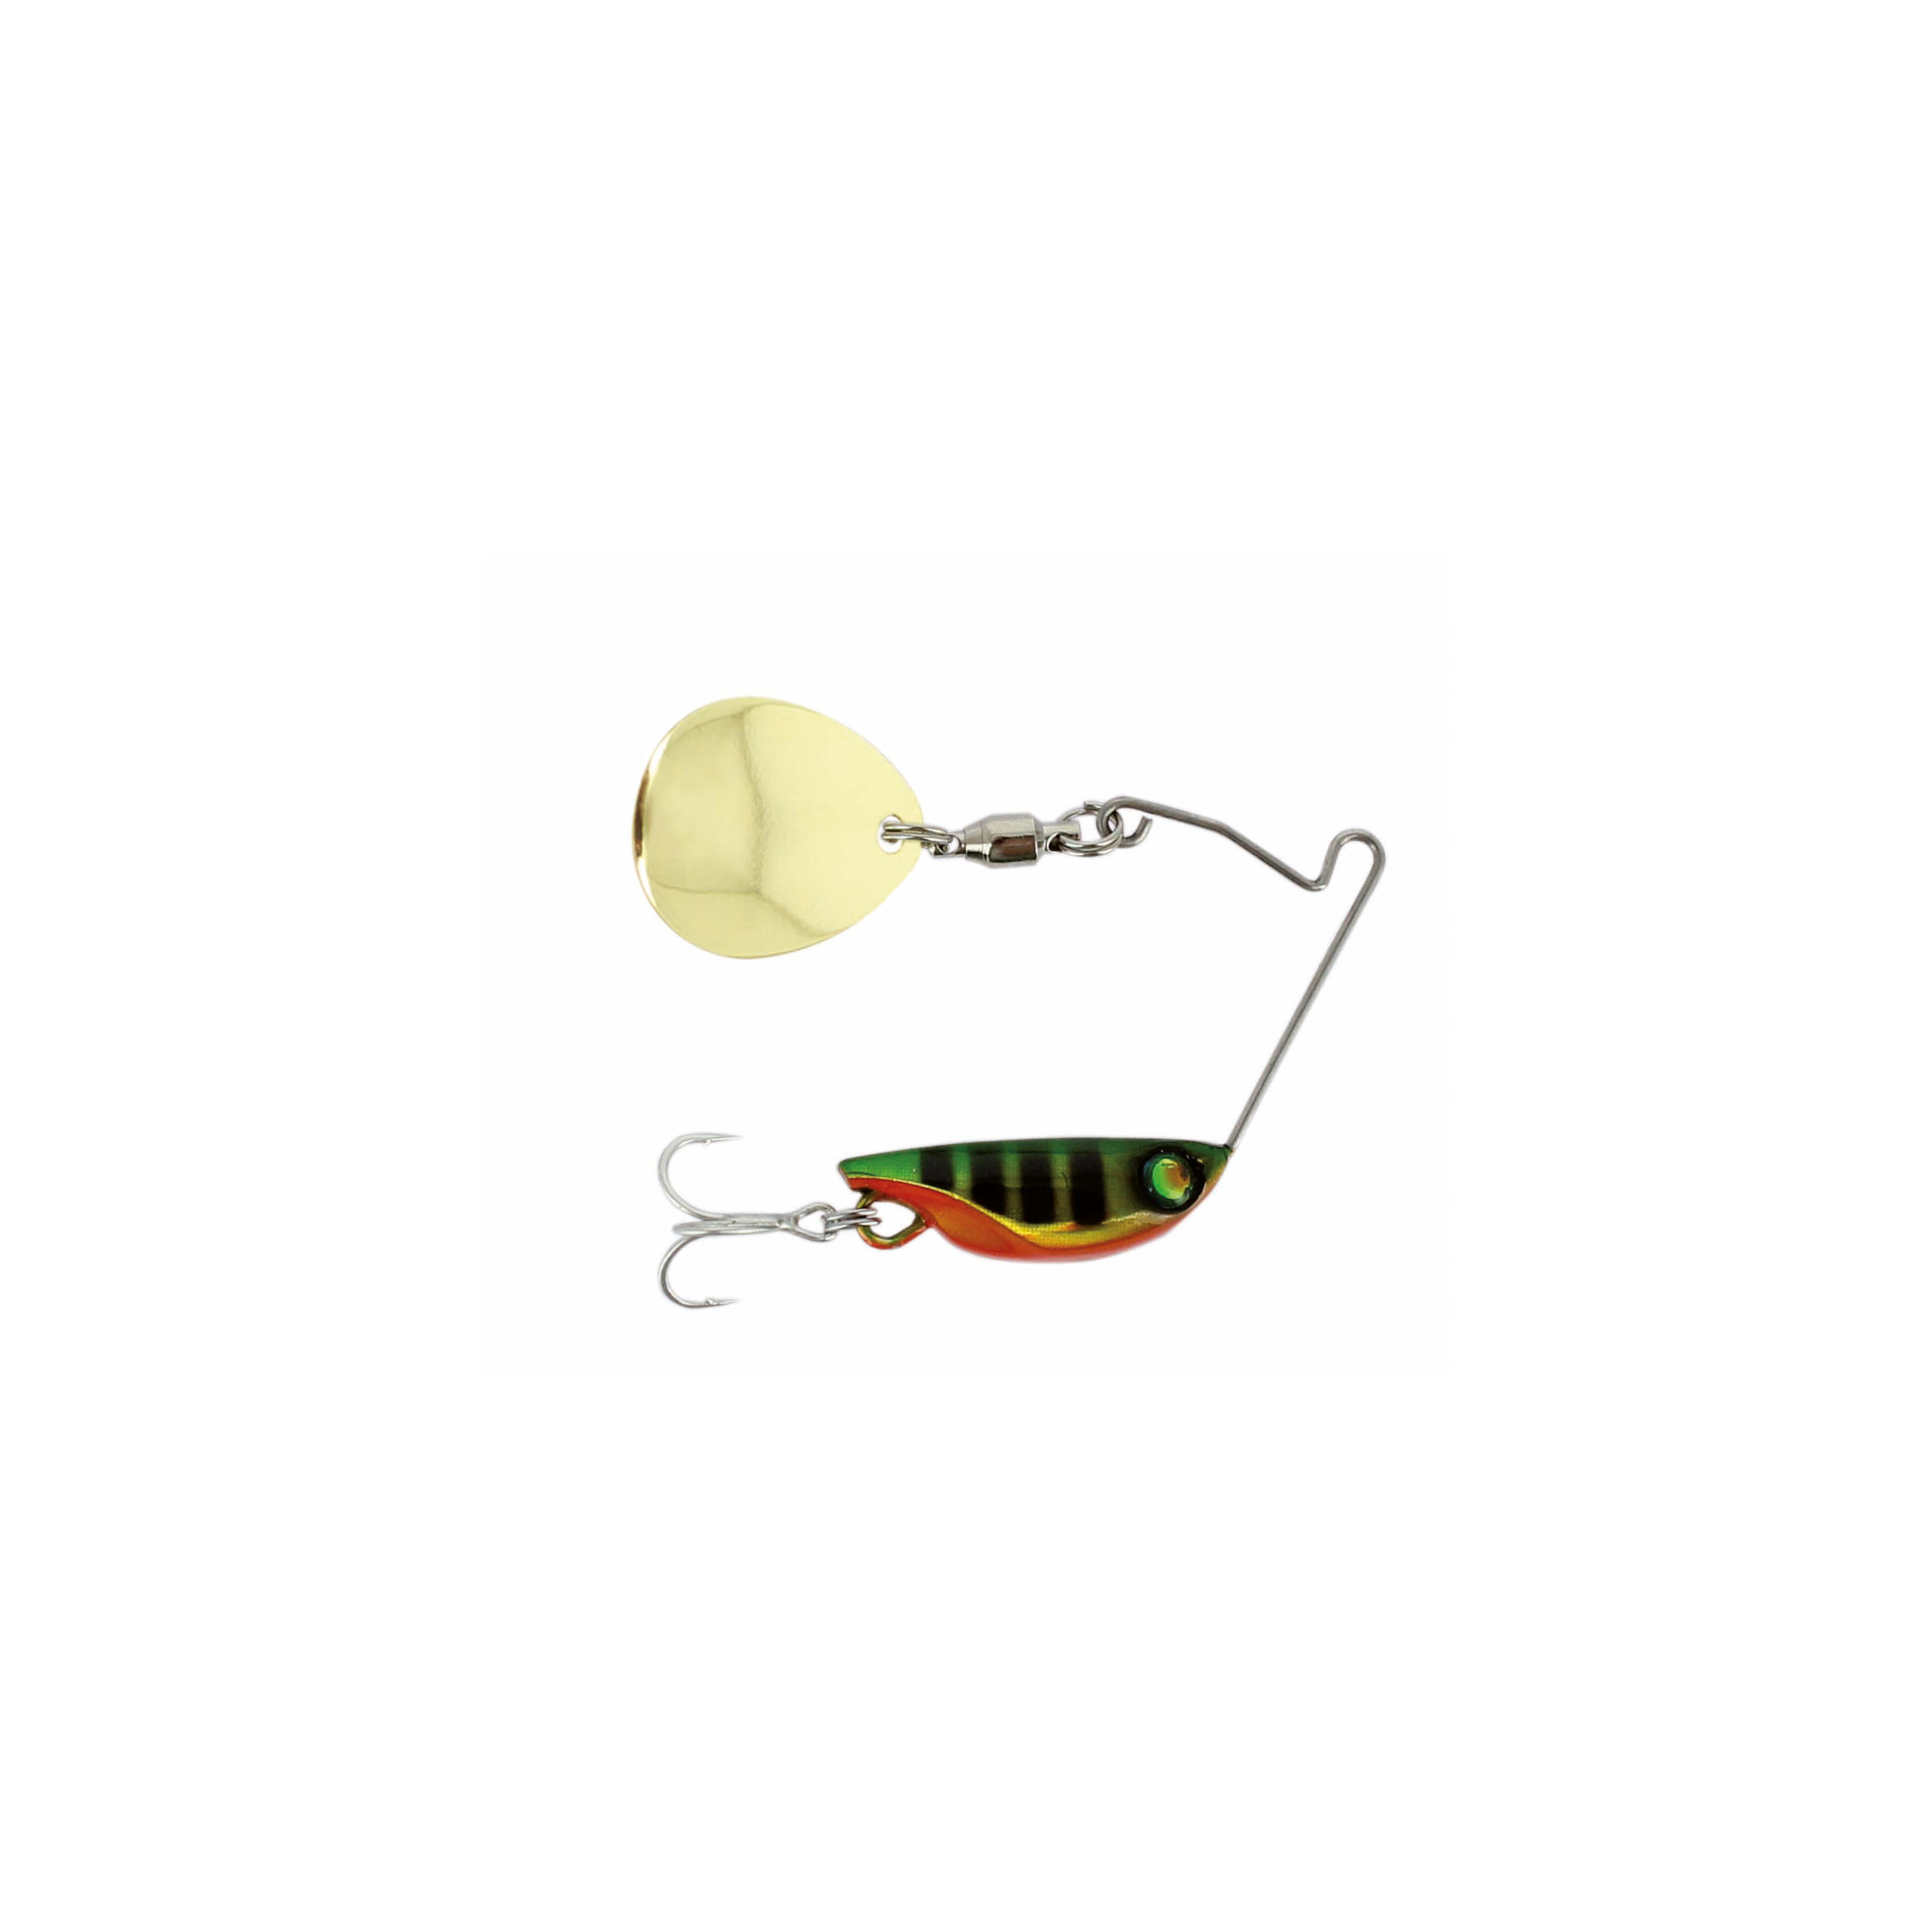 Autain Perch Lure Fishing Spinner Microspinner Nano'x 6g